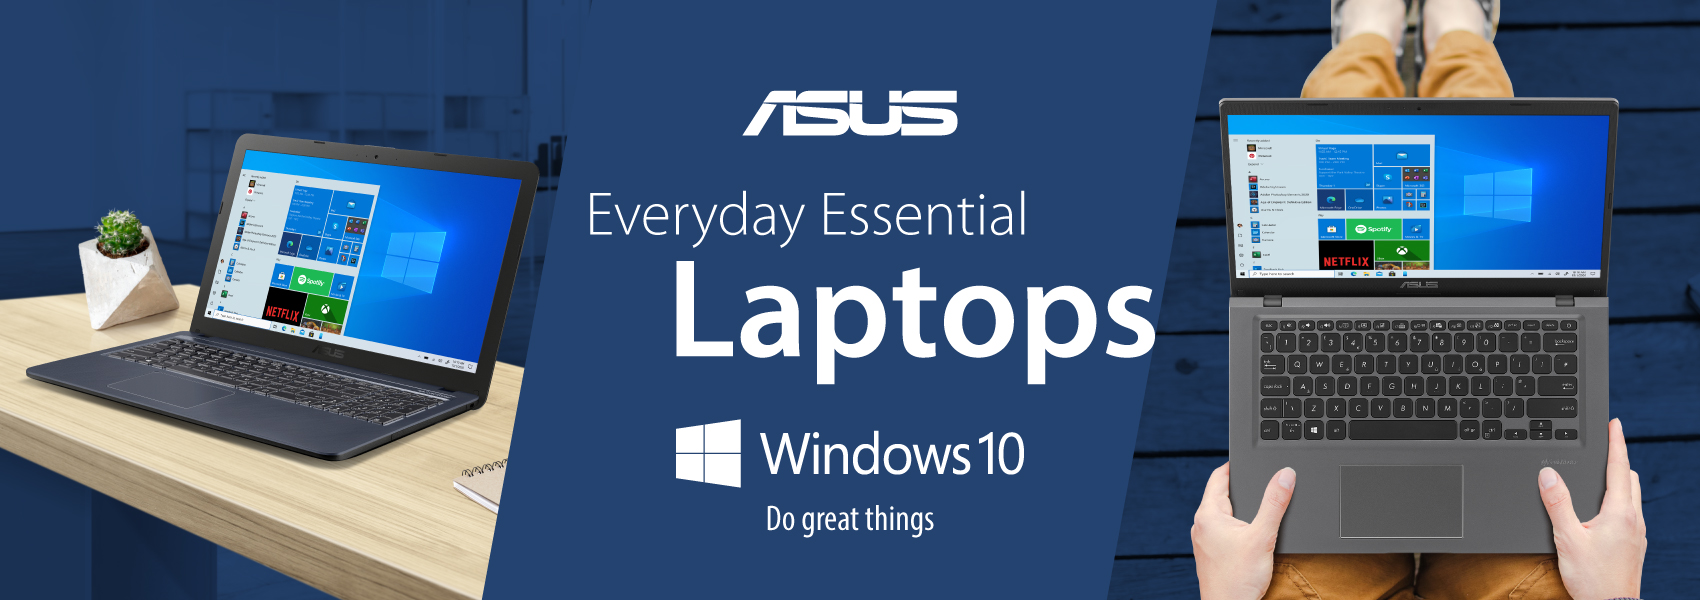 1ASUS-PC-Works-Web-Banners_1700x600px_Everyday-Essentials.jpg